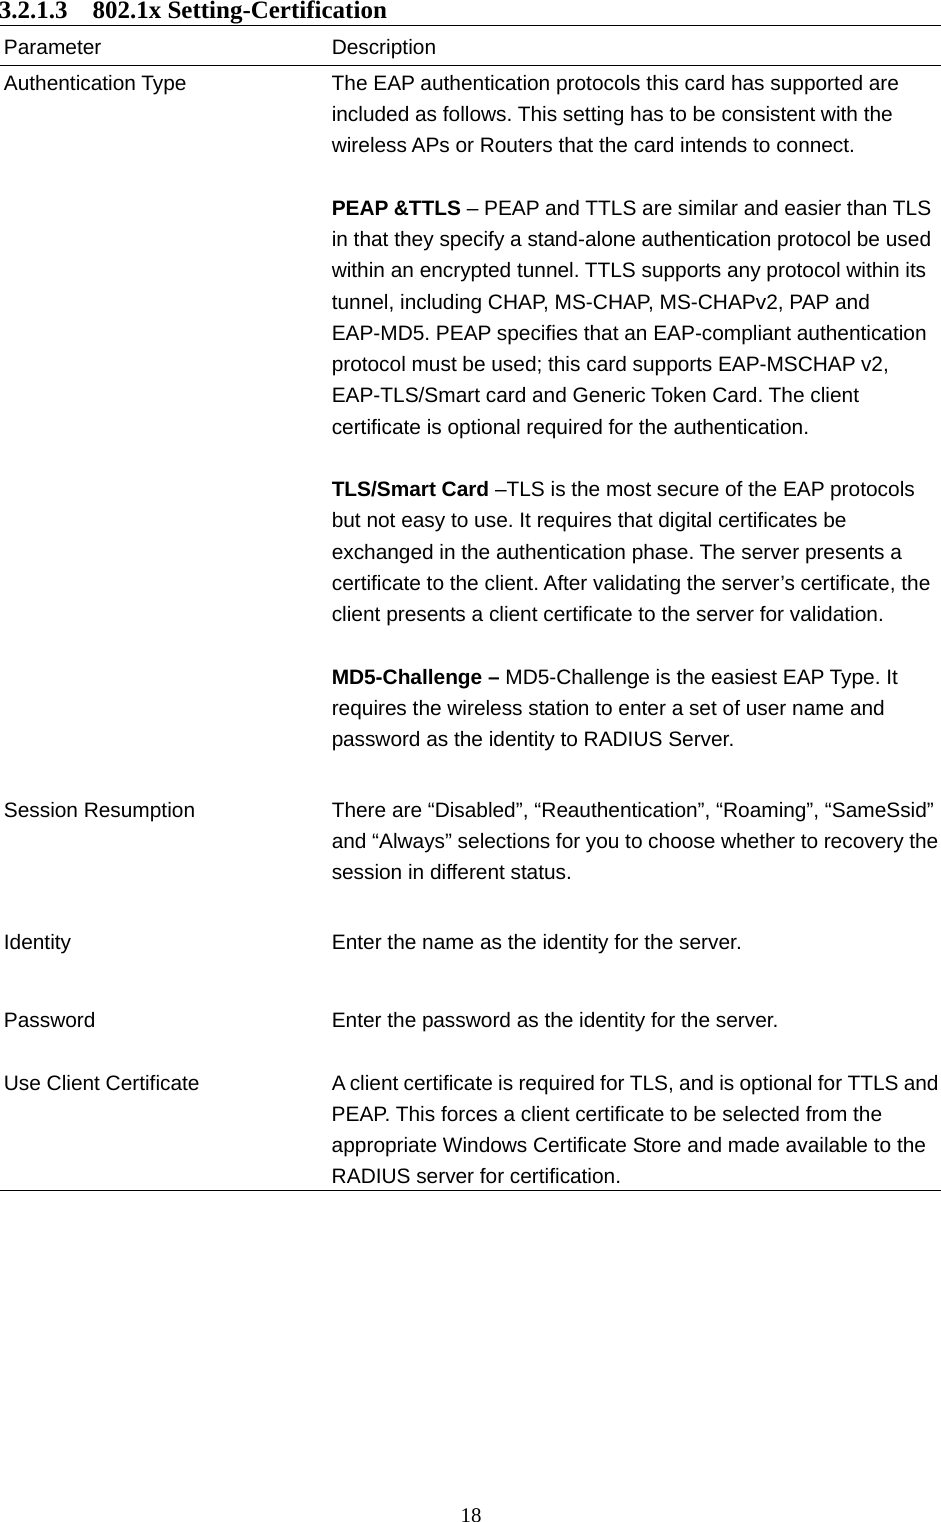  18 3.2.1.3  802.1x Setting-Certification Parameter Description Authentication Type  The EAP authentication protocols this card has supported are included as follows. This setting has to be consistent with the wireless APs or Routers that the card intends to connect.  PEAP &amp;TTLS – PEAP and TTLS are similar and easier than TLS in that they specify a stand-alone authentication protocol be used within an encrypted tunnel. TTLS supports any protocol within its tunnel, including CHAP, MS-CHAP, MS-CHAPv2, PAP and EAP-MD5. PEAP specifies that an EAP-compliant authentication protocol must be used; this card supports EAP-MSCHAP v2, EAP-TLS/Smart card and Generic Token Card. The client certificate is optional required for the authentication.  TLS/Smart Card –TLS is the most secure of the EAP protocols but not easy to use. It requires that digital certificates be exchanged in the authentication phase. The server presents a certificate to the client. After validating the server’s certificate, the client presents a client certificate to the server for validation.    MD5-Challenge – MD5-Challenge is the easiest EAP Type. It requires the wireless station to enter a set of user name and password as the identity to RADIUS Server.   Session Resumption  There are “Disabled”, “Reauthentication”, “Roaming”, “SameSsid” and “Always” selections for you to choose whether to recovery the session in different status.   Identity  Enter the name as the identity for the server.   Password  Enter the password as the identity for the server. Use Client Certificate A client certificate is required for TLS, and is optional for TTLS and PEAP. This forces a client certificate to be selected from the appropriate Windows Certificate Store and made available to the RADIUS server for certification.          